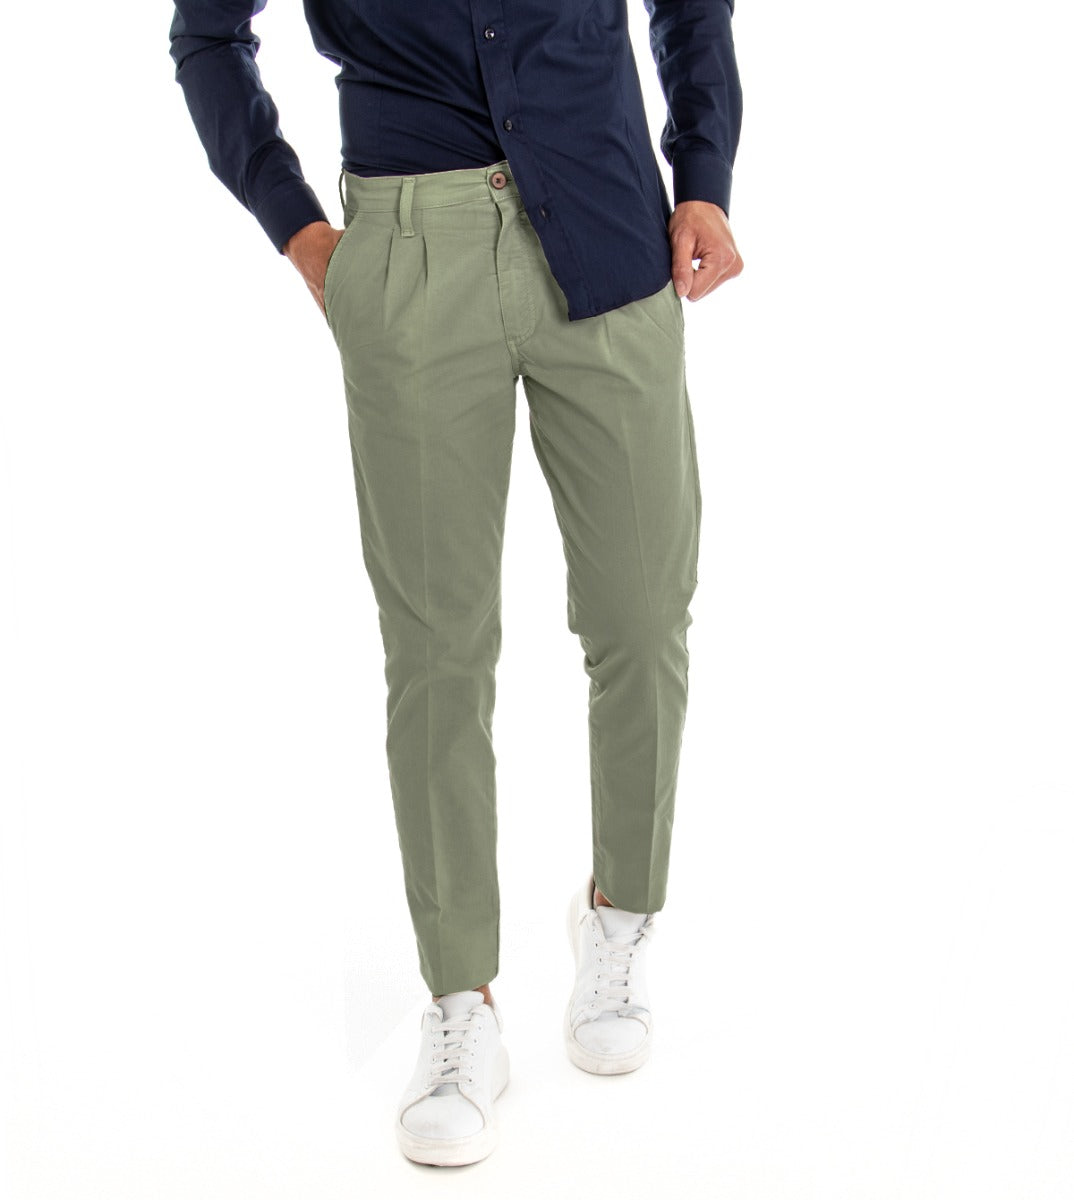 Classic Long Men's Trousers Solid Color Green Pleats America Pocket GIOSAL